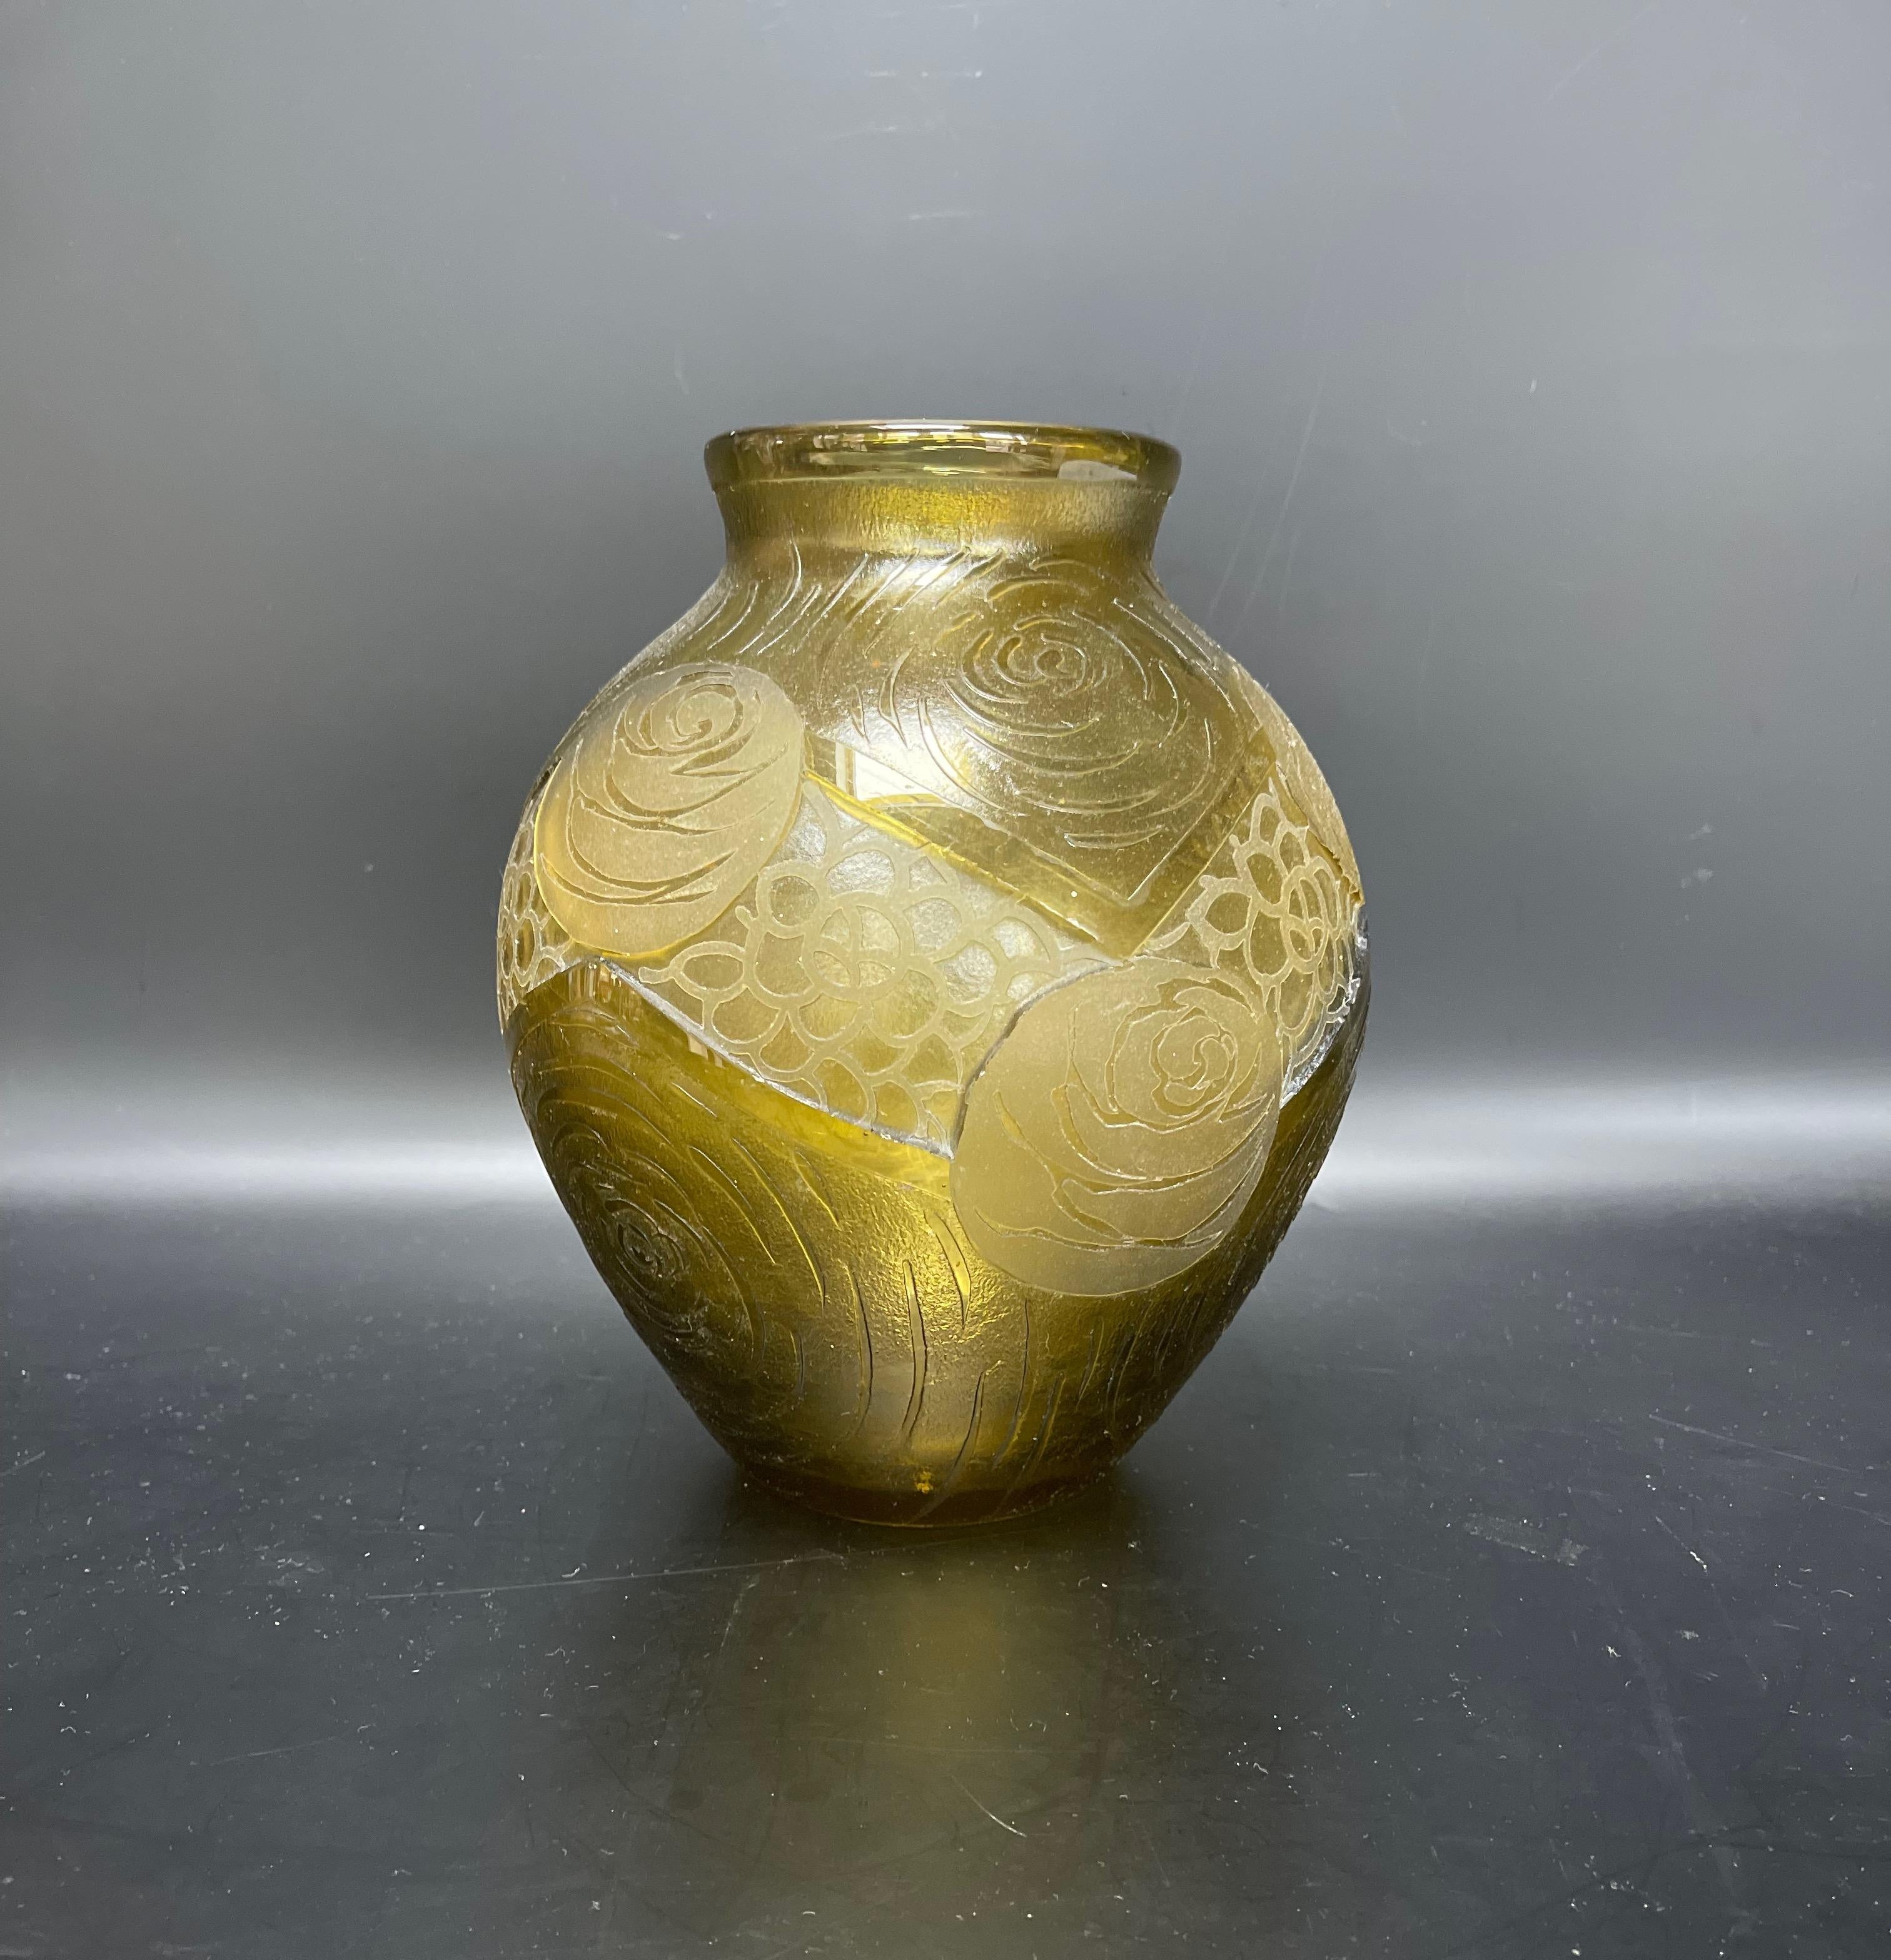 Art deco vase circa 1925. Acid-etched yellow glass with floral decoration.
Signed Montjoye with acid in the decor.
In perfect condition.

Total height: 21.5 cm
Diameter: 18.5cm
Weight 1.8 kg


François-Théodore Legras, born December 27, 1839 in the